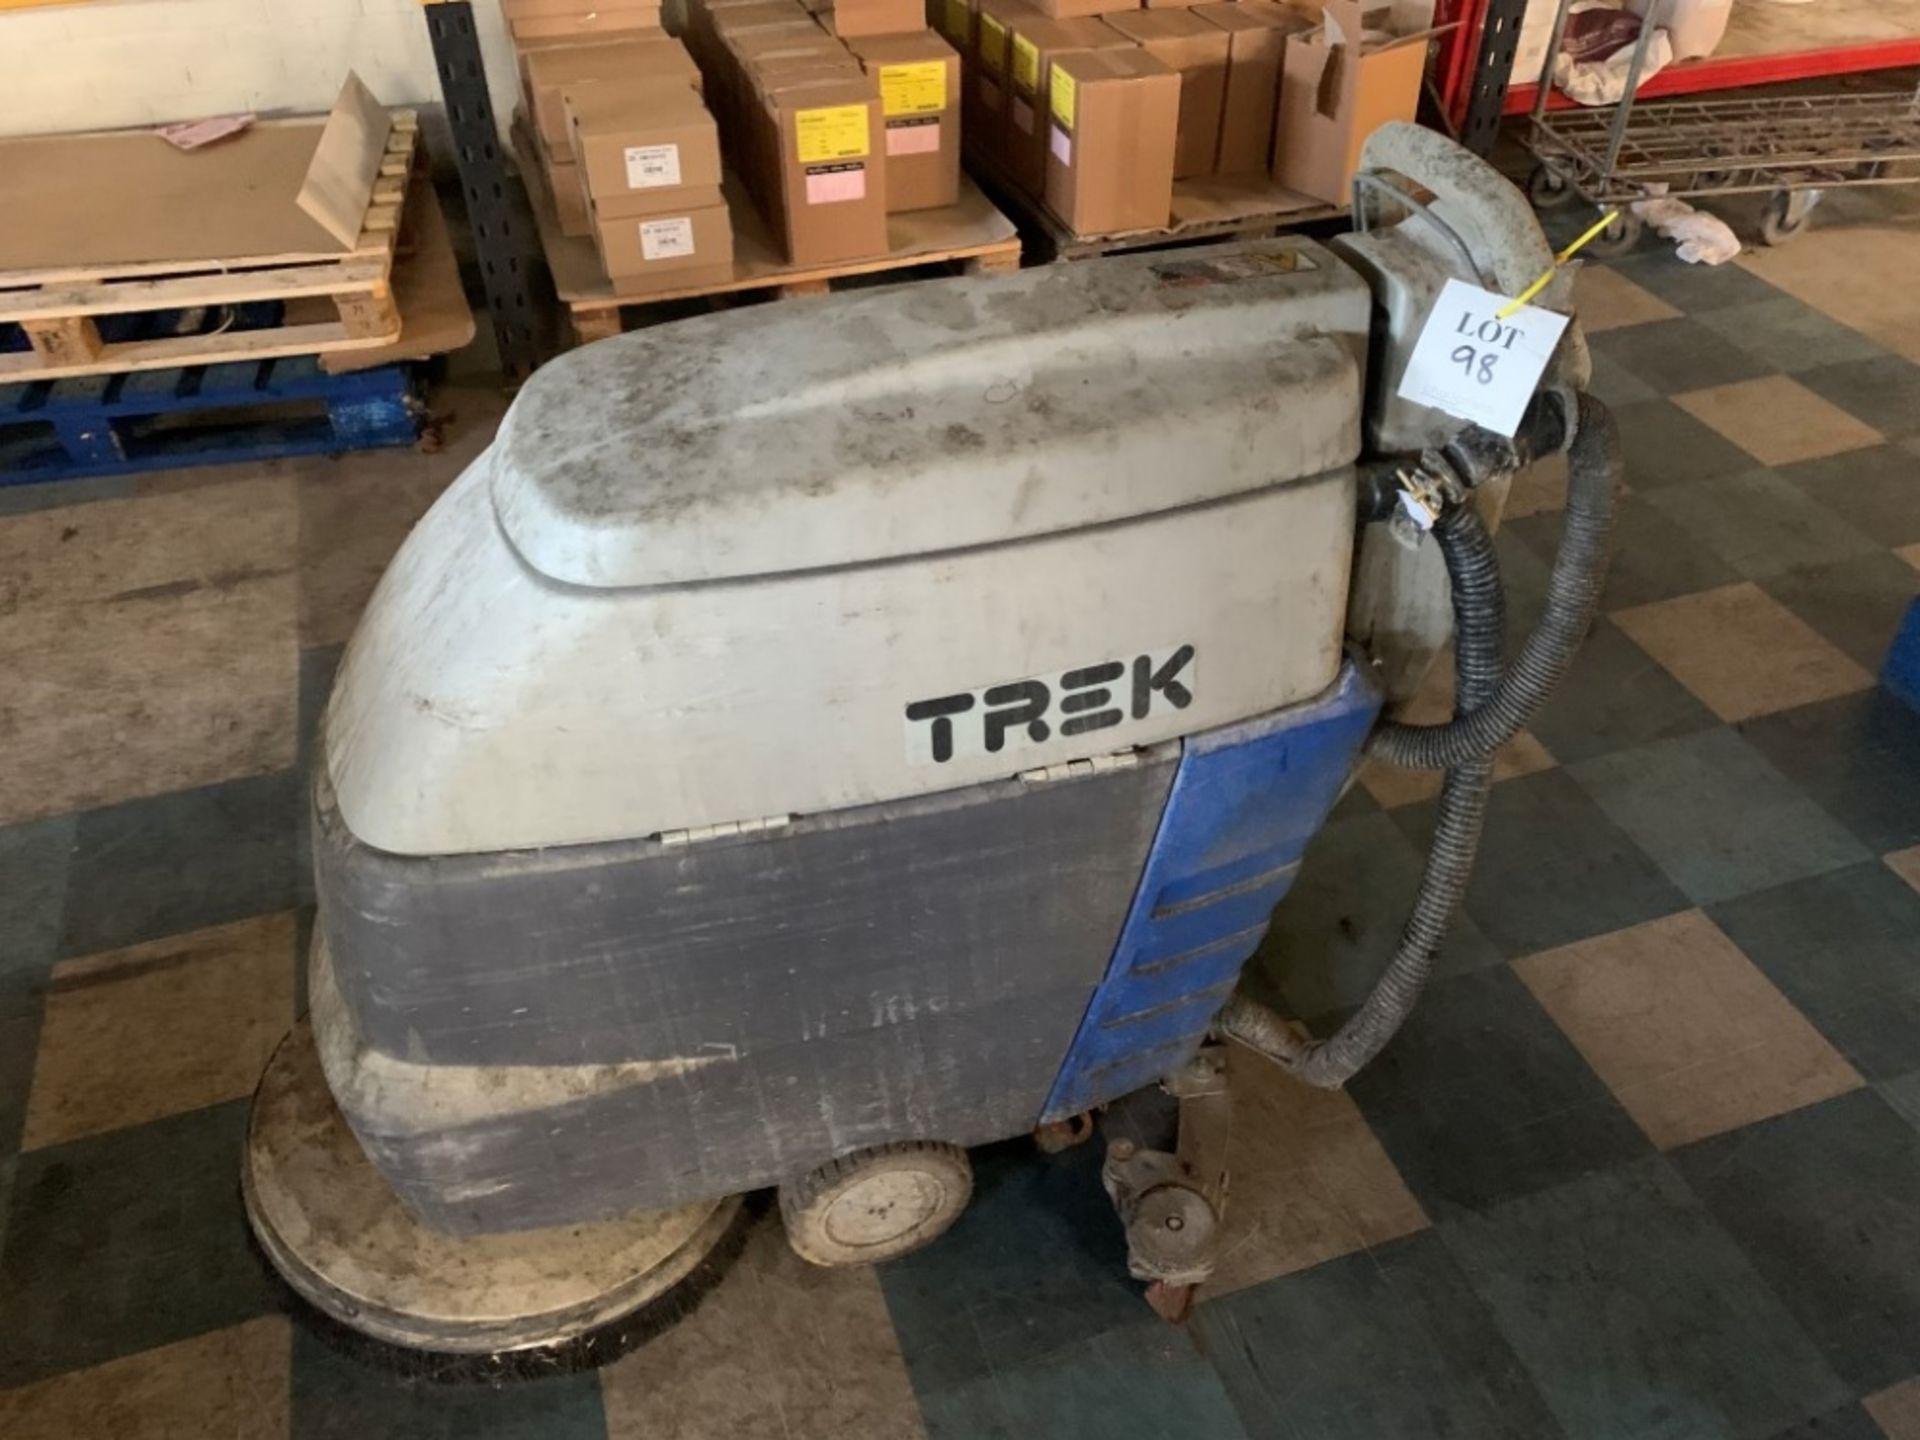 Trek floor cleaner and charger